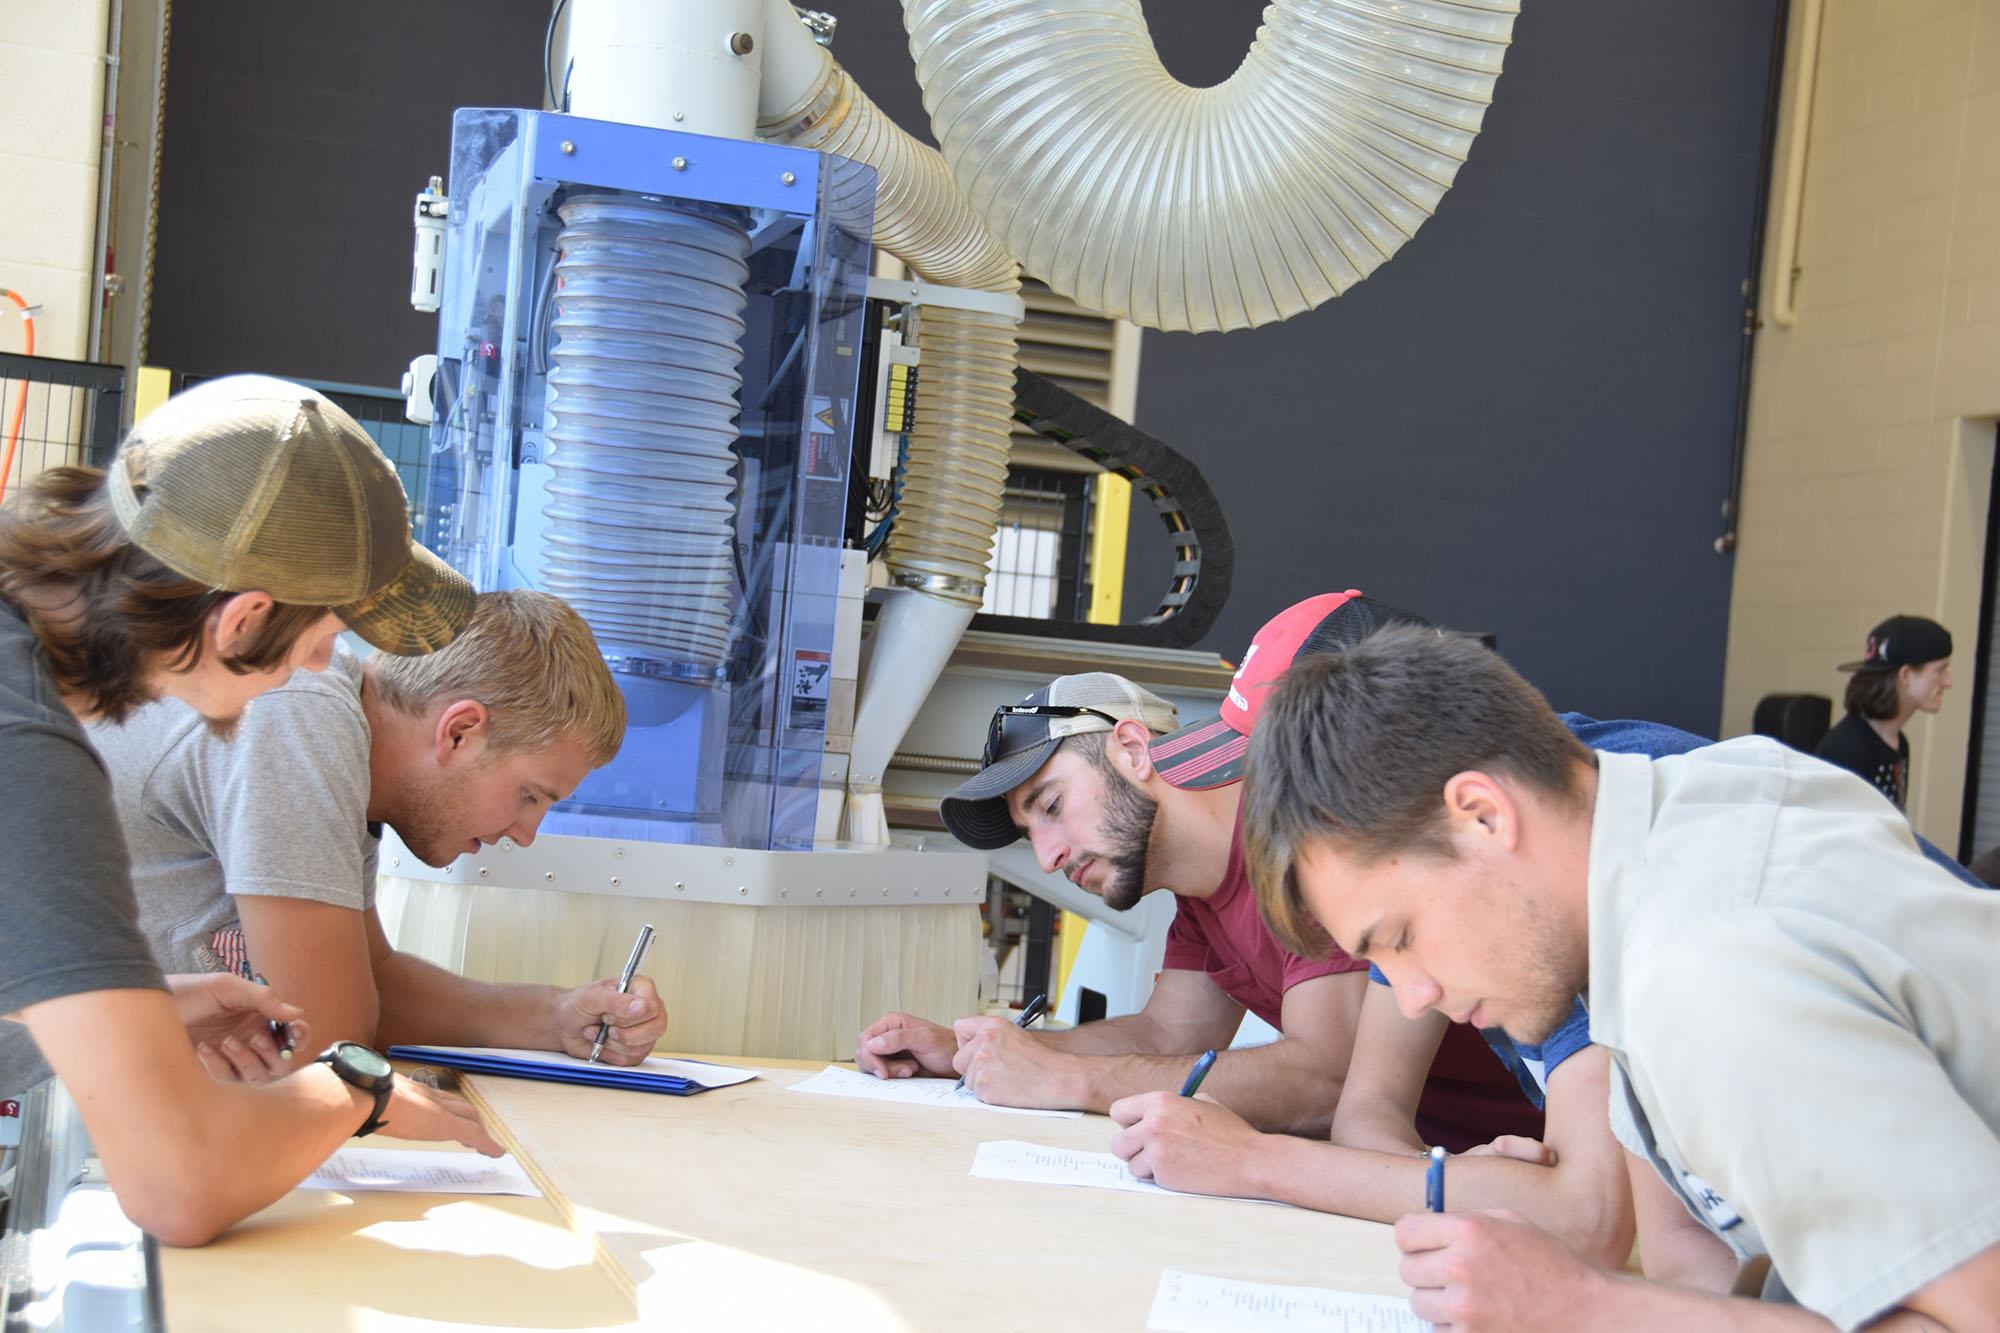 A group of students completing an assignment in front of a machine